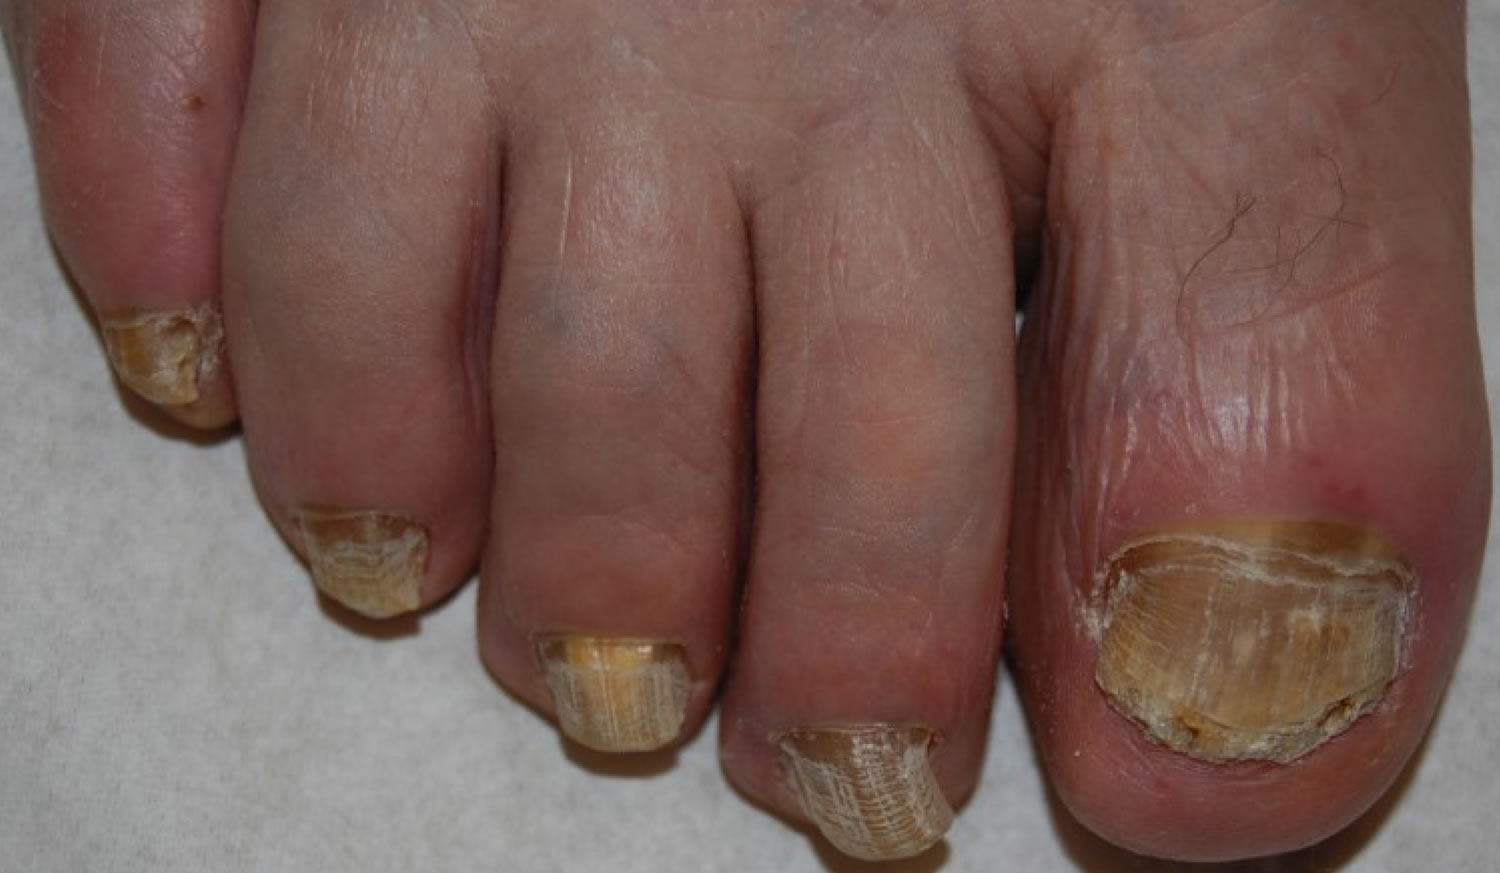 Onychomycosis causes, clinical appearance and onychomycosis treatment